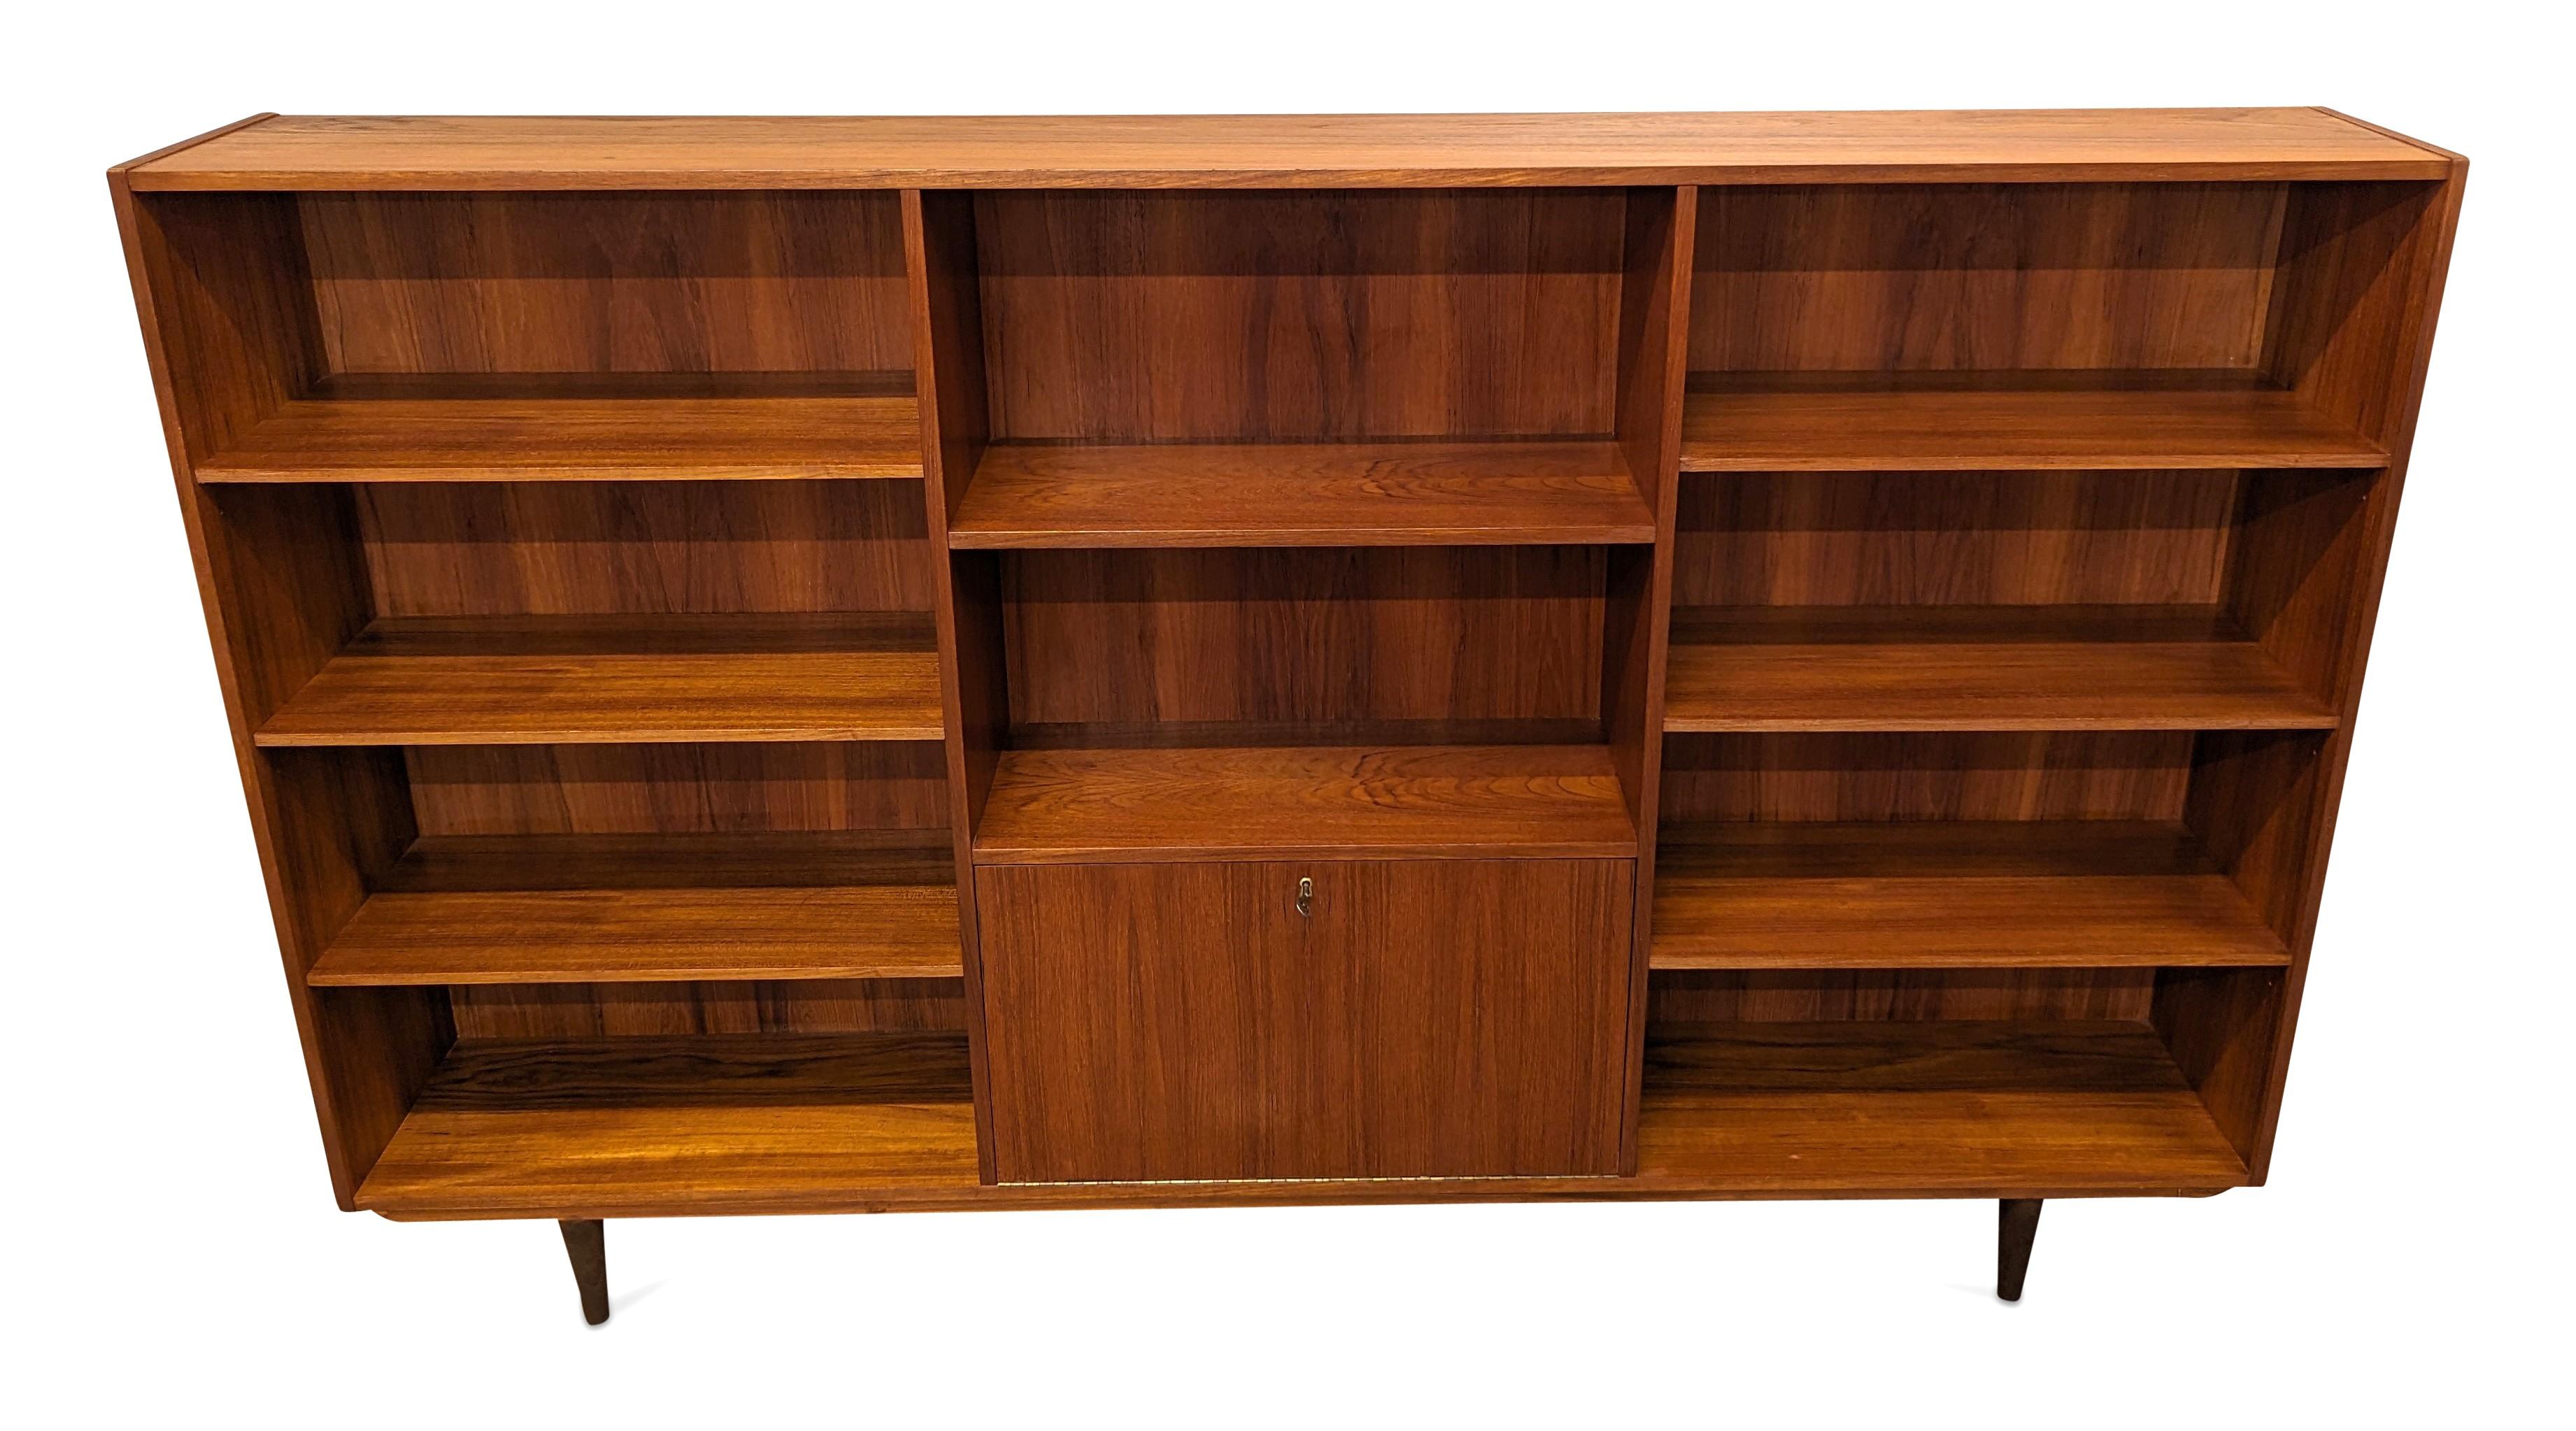 Vintage Danish Mid Century Long Teak Bookcase - 0224111 In Good Condition For Sale In Jersey City, NJ